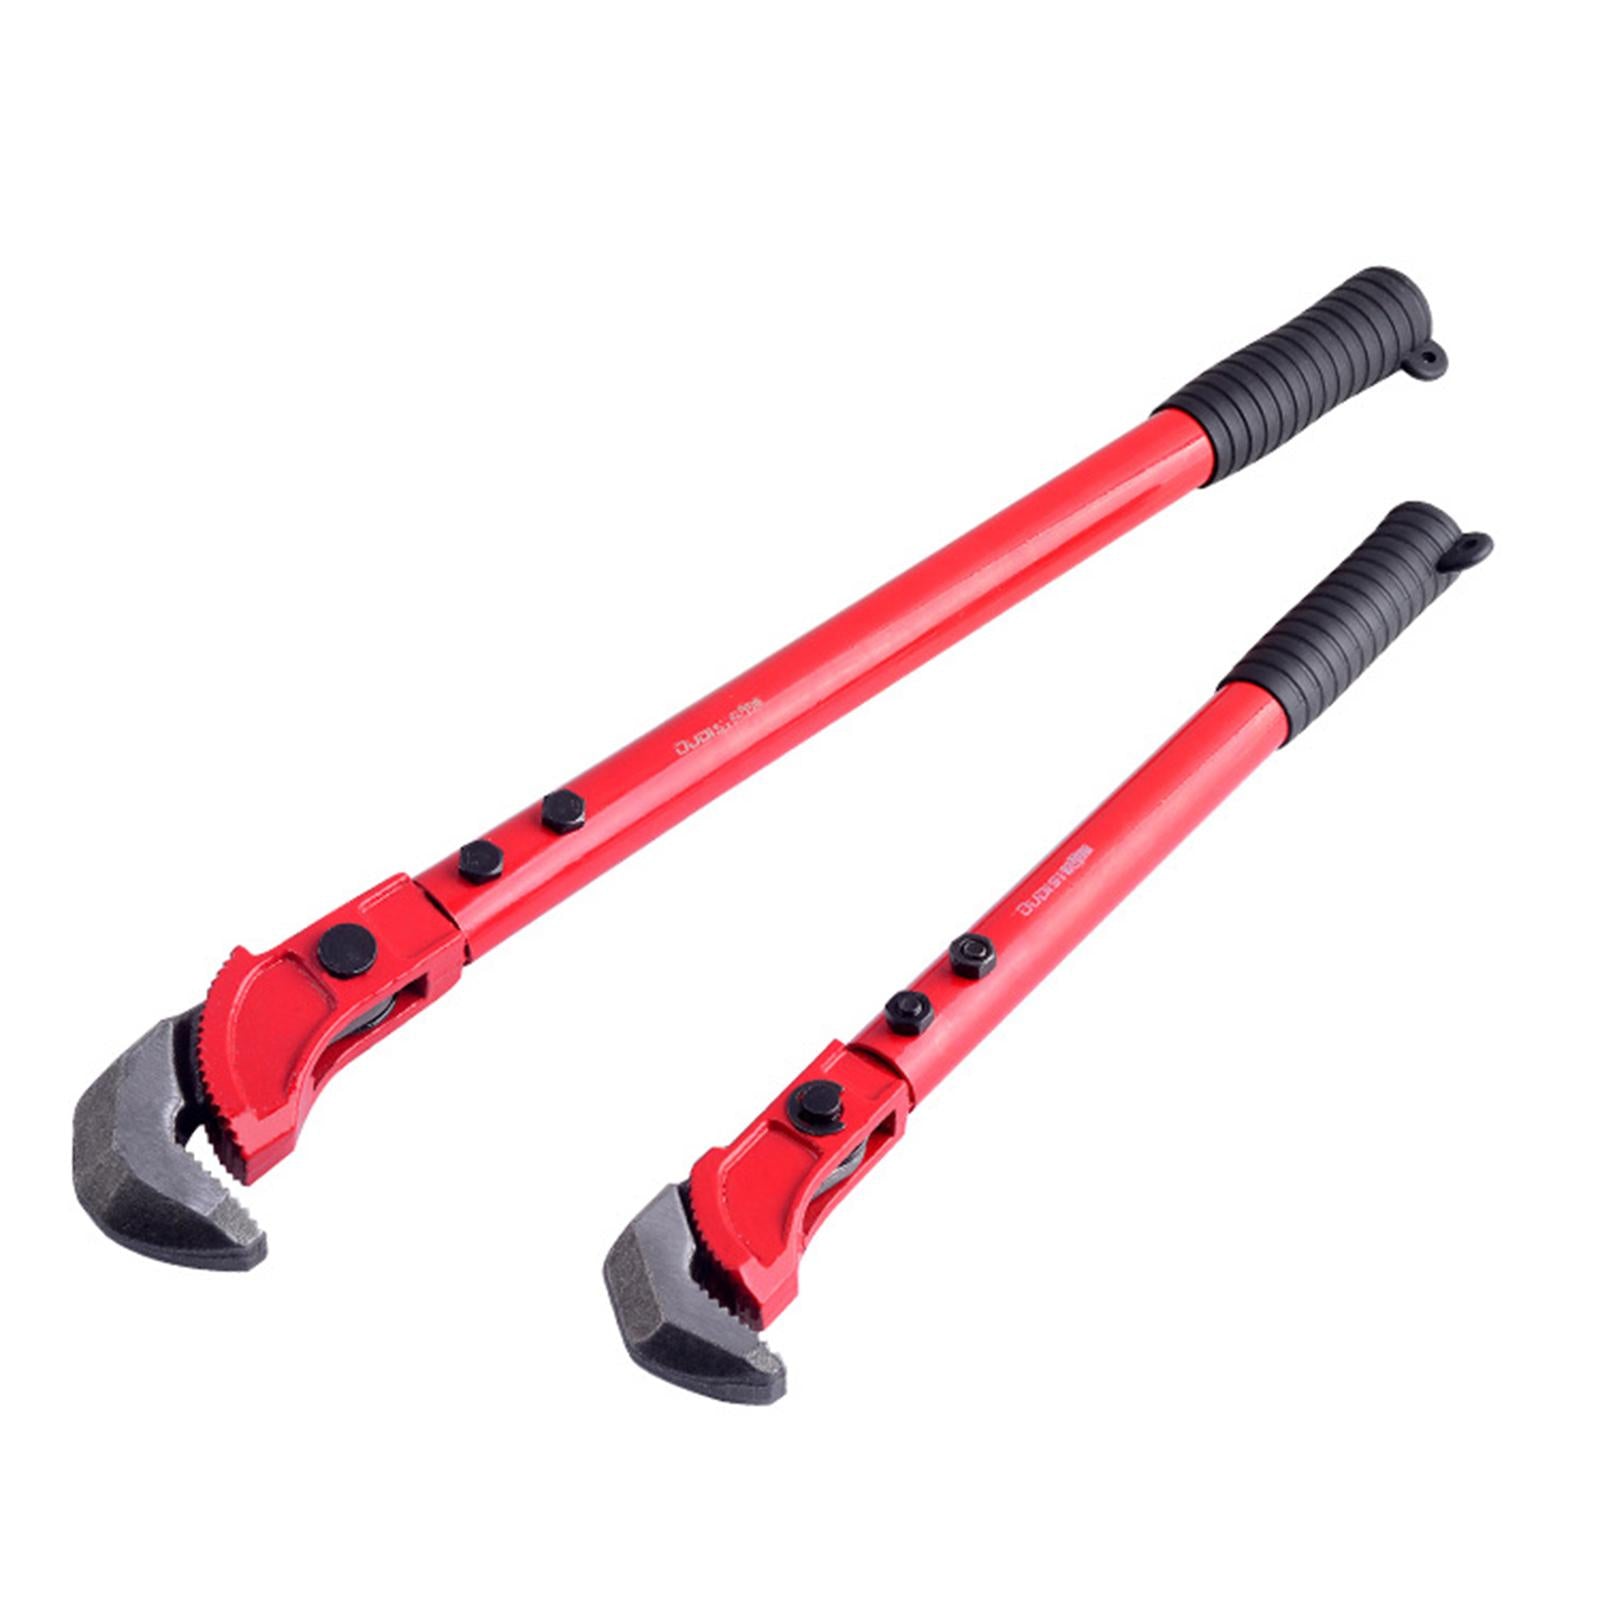 Portable Adjustable Wrench Heavy Duty Grip Spanner Hand Tool for Pipe 18inch